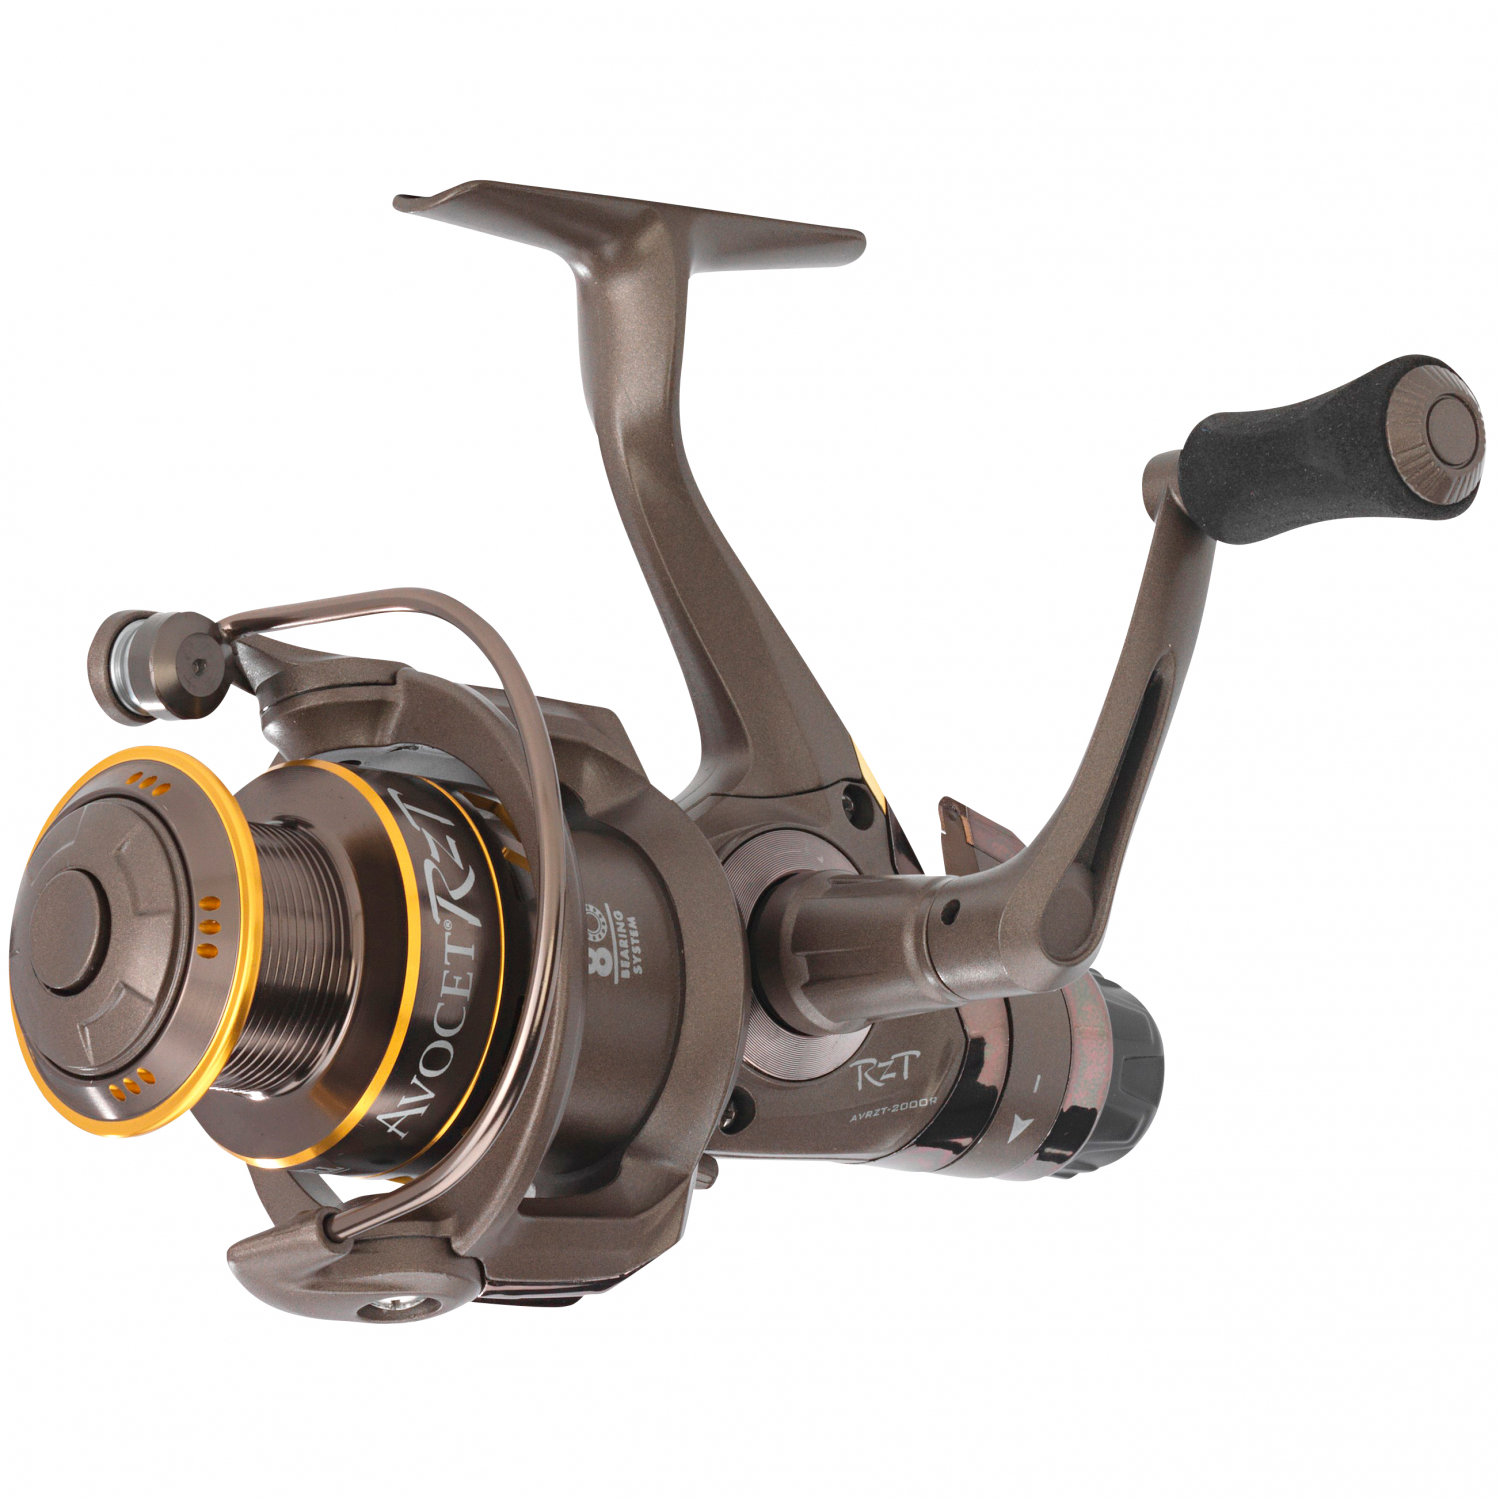 Mitchell Fishing Reel Avocet RZT RD at low prices